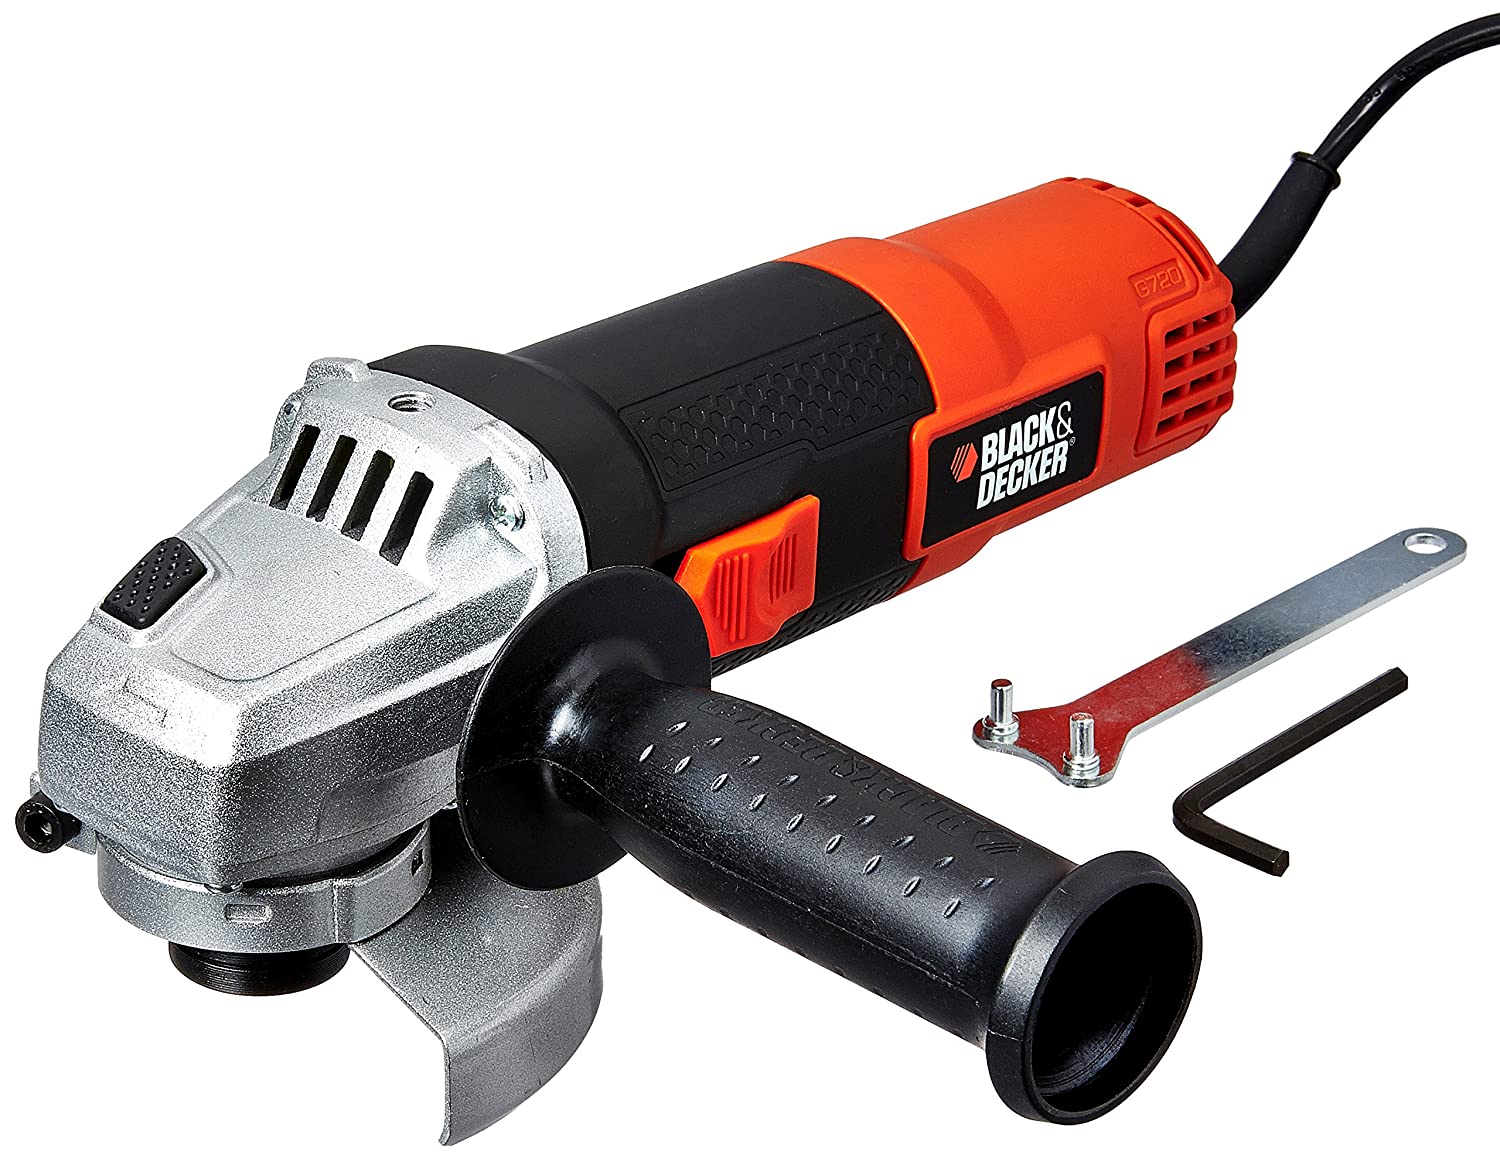 BLACK + DECKER G720 820W 4''/100mm Small Angle Grinder (Red & Black)